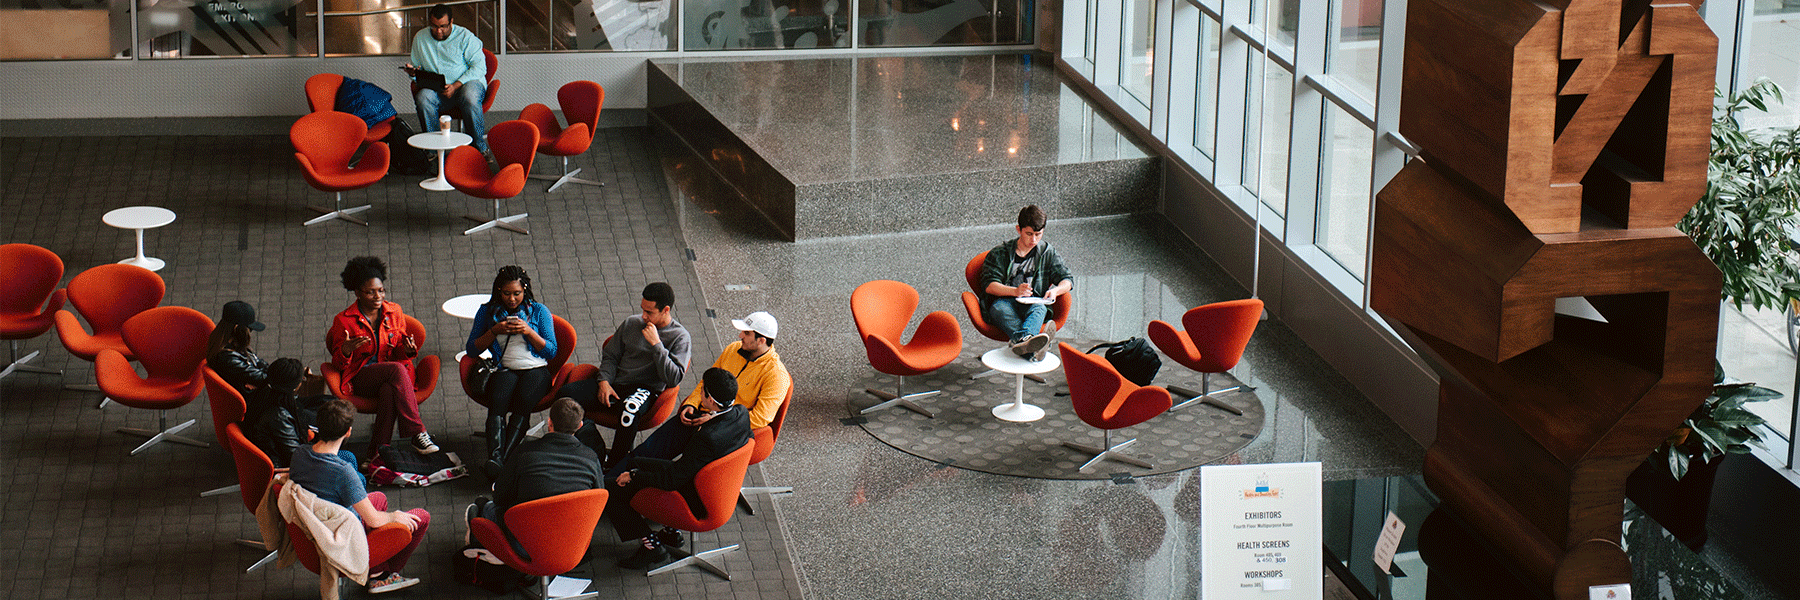 Students sitting in a circle and conversing in the campus center.